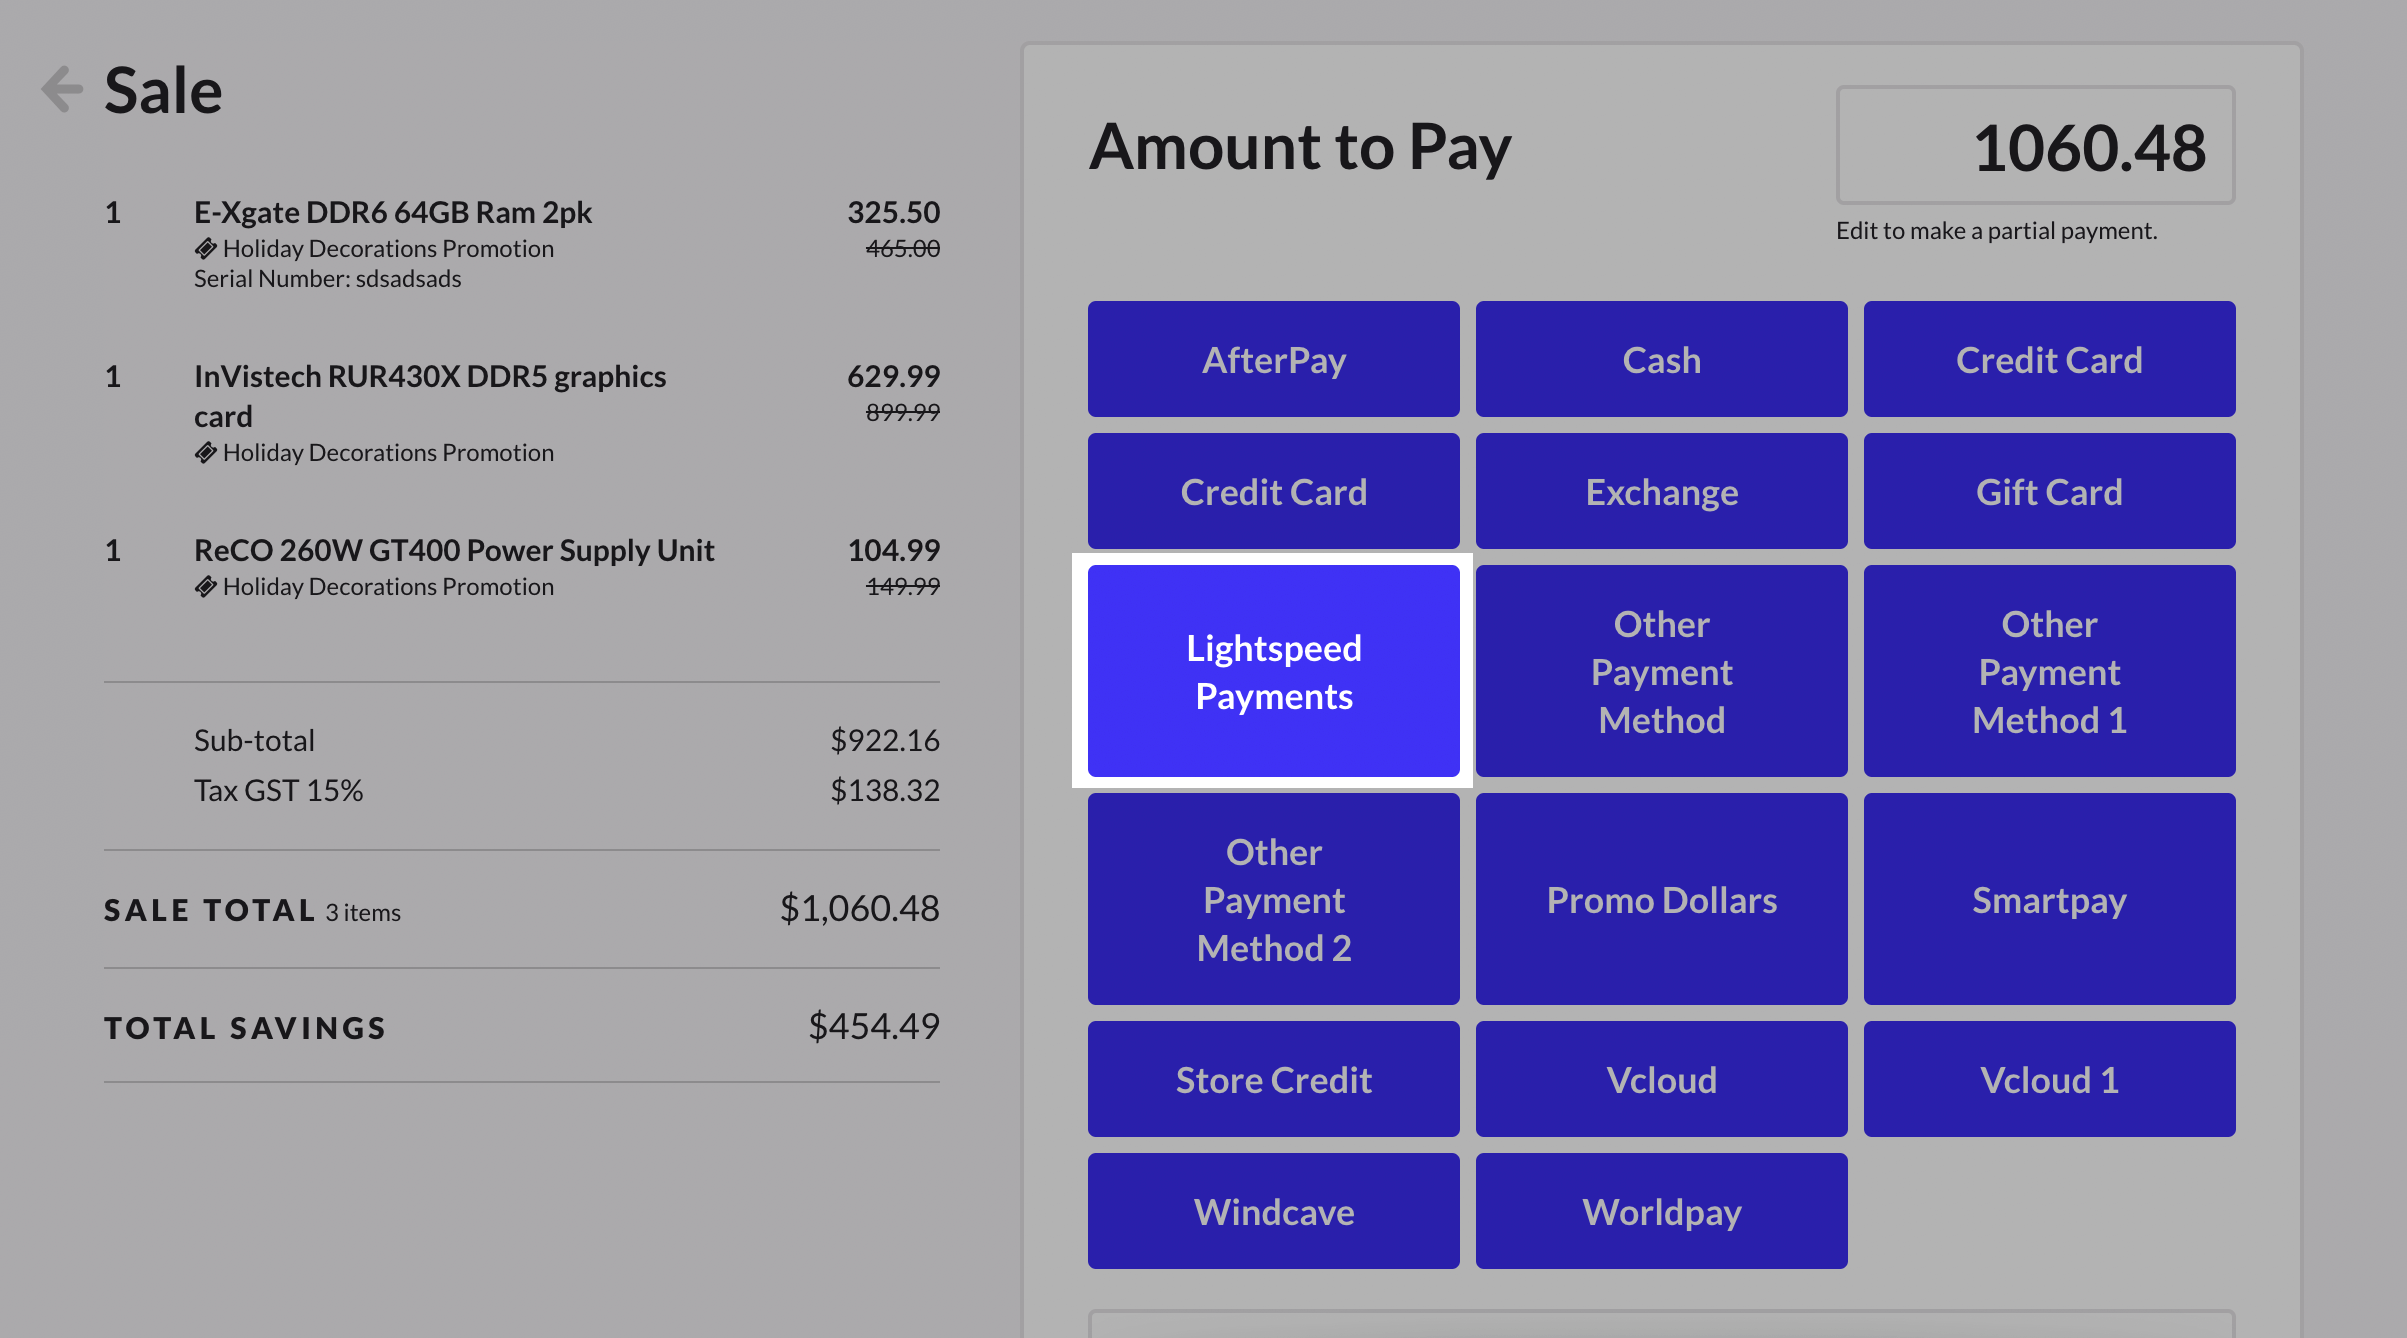 LS-Pay-Card-Not-Present-Sale-Payment-Type.png